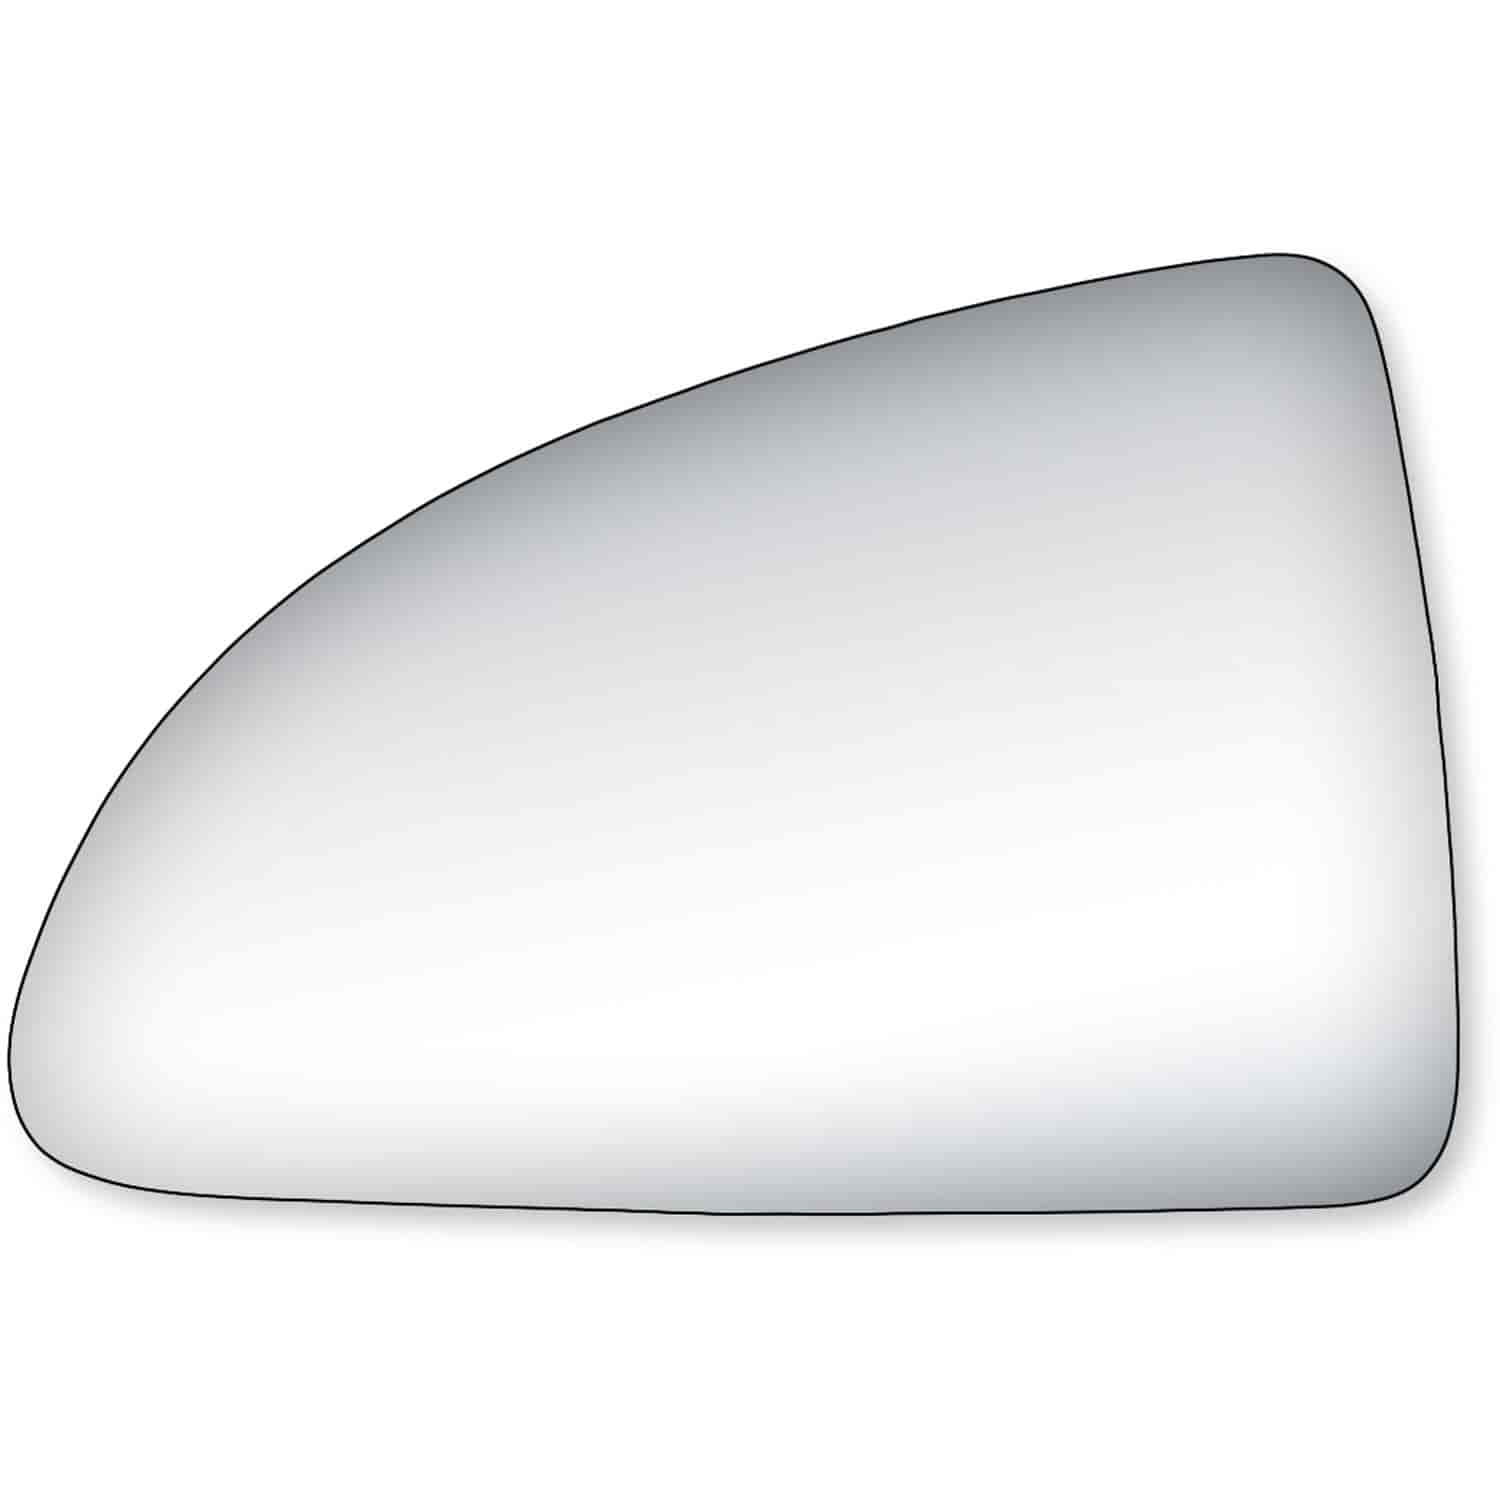 Replacement Glass for 05-10 Cobalt Coupe; 05-10 Cobalt Sedan; 05-10 G5 the glass measures 4 tall by